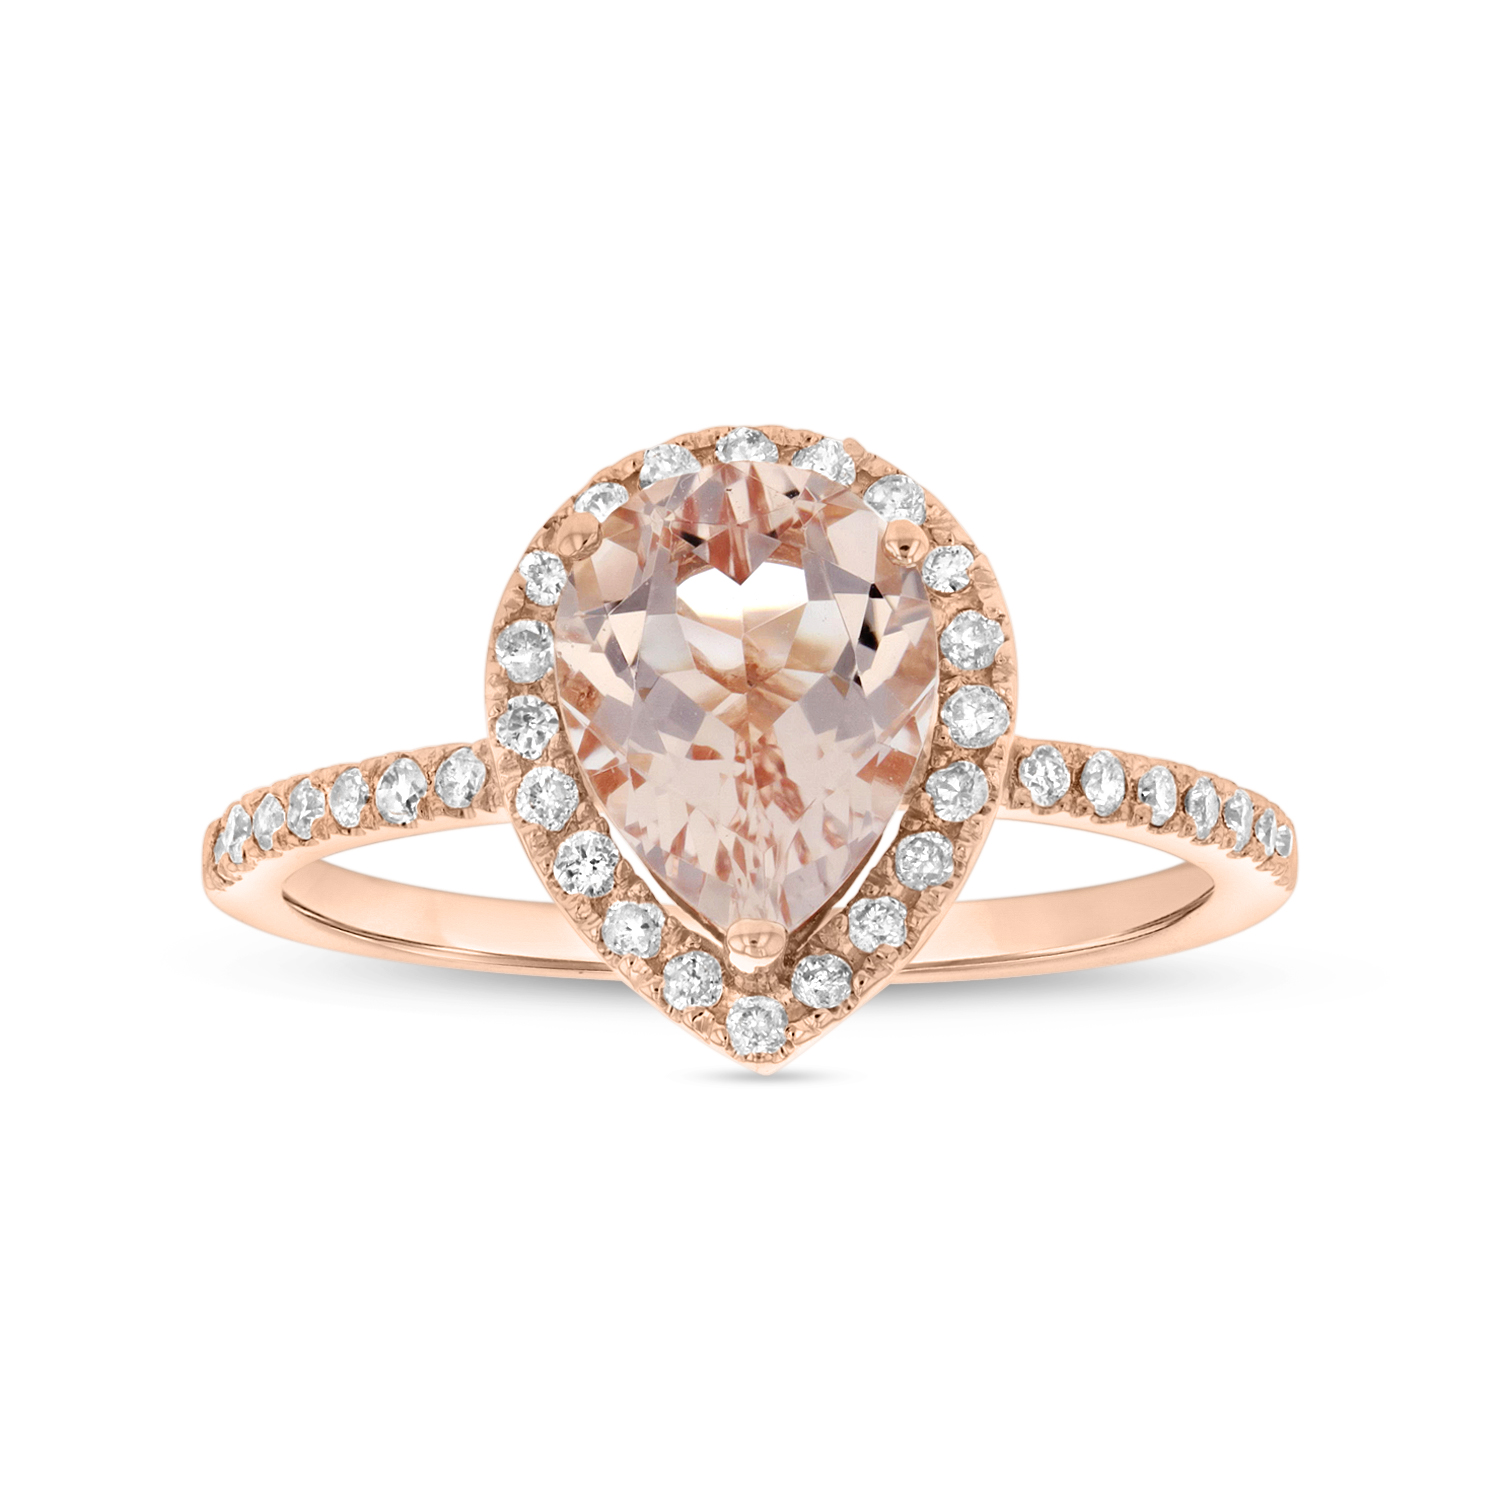 View 8X6 mm Pear Shape Morganite and Diamond Ring in 14k Rose Gold